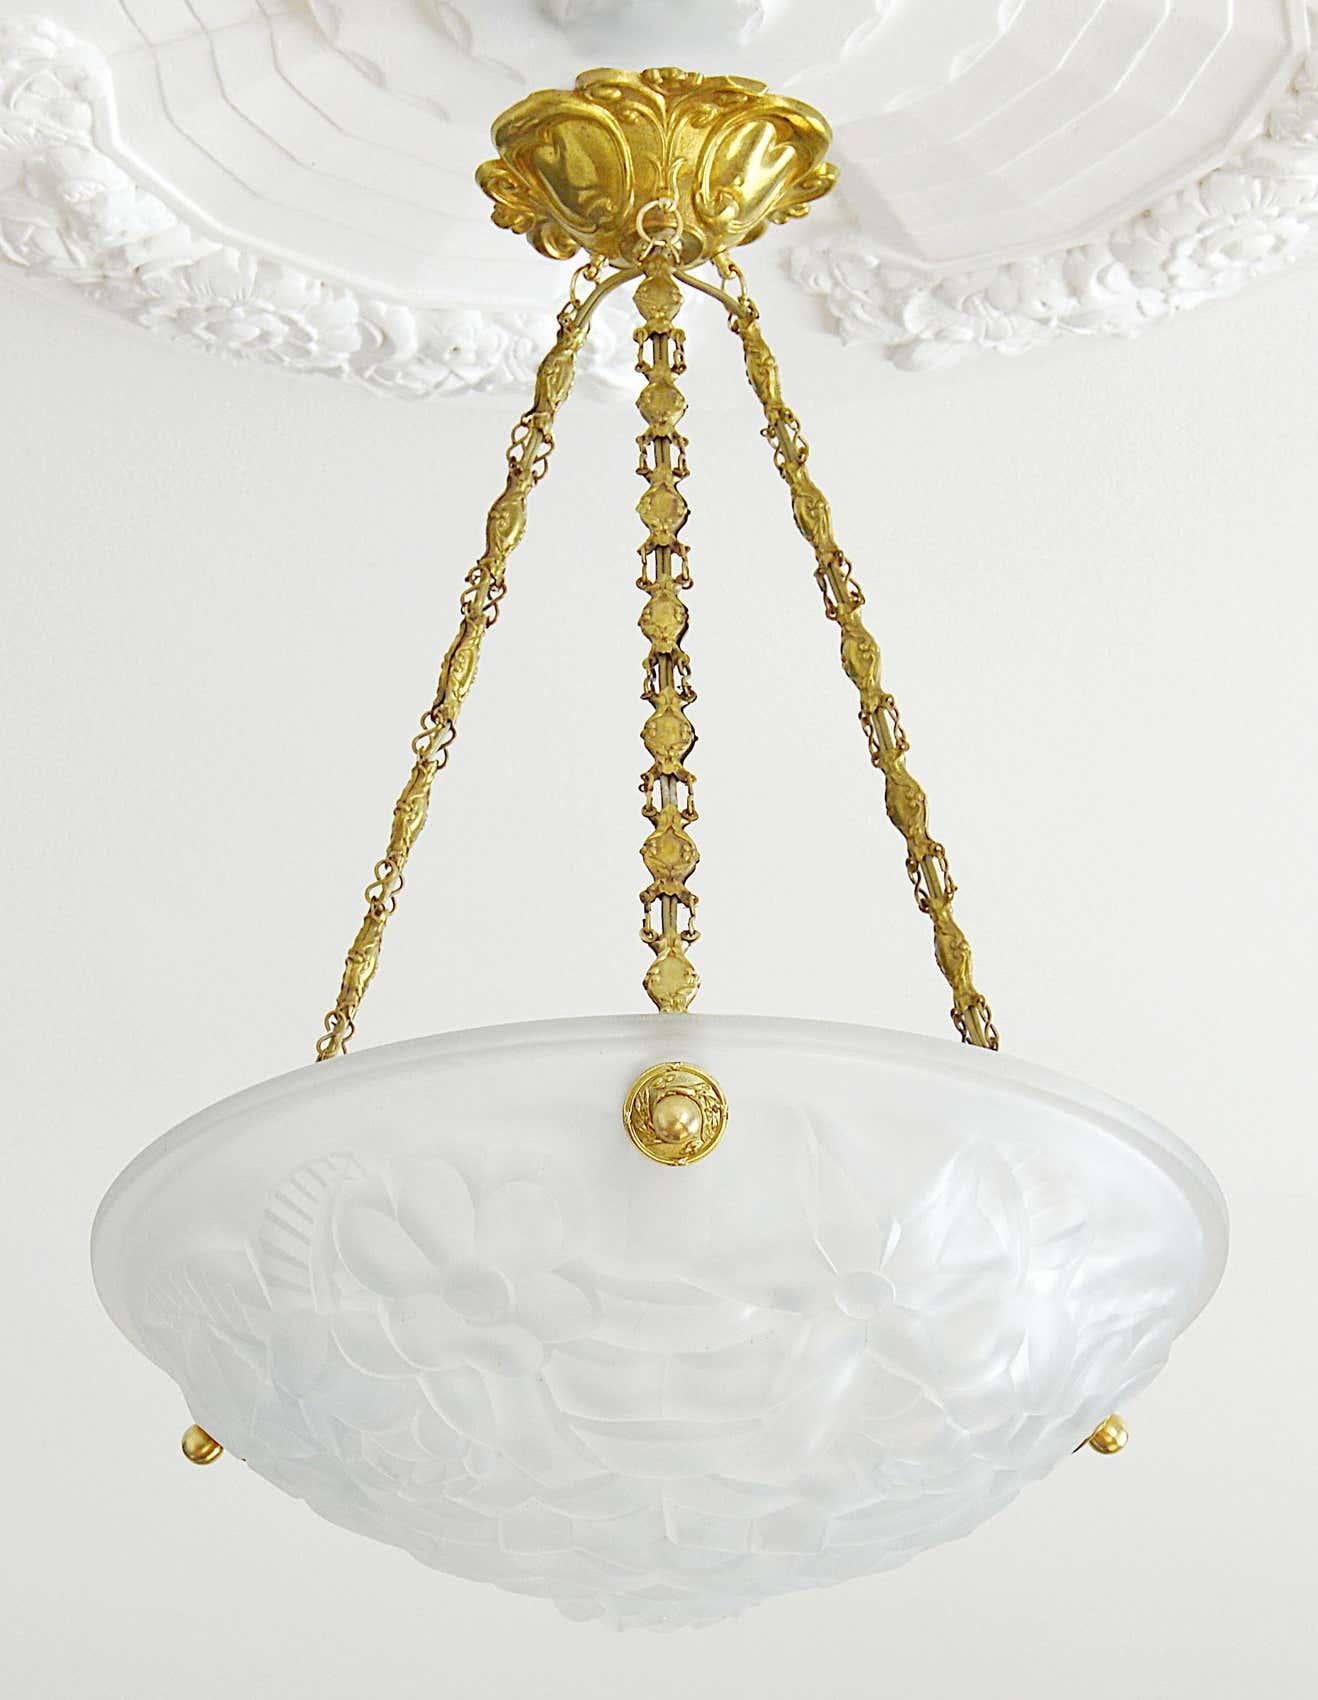 French Art Deco pair of pendant chandeliers by Degue (Compiegne), France, late 1920s. White frosted glass shades with an Art Deco stylized floral pattern. Stamped brass frames. Measures: Height 19.3